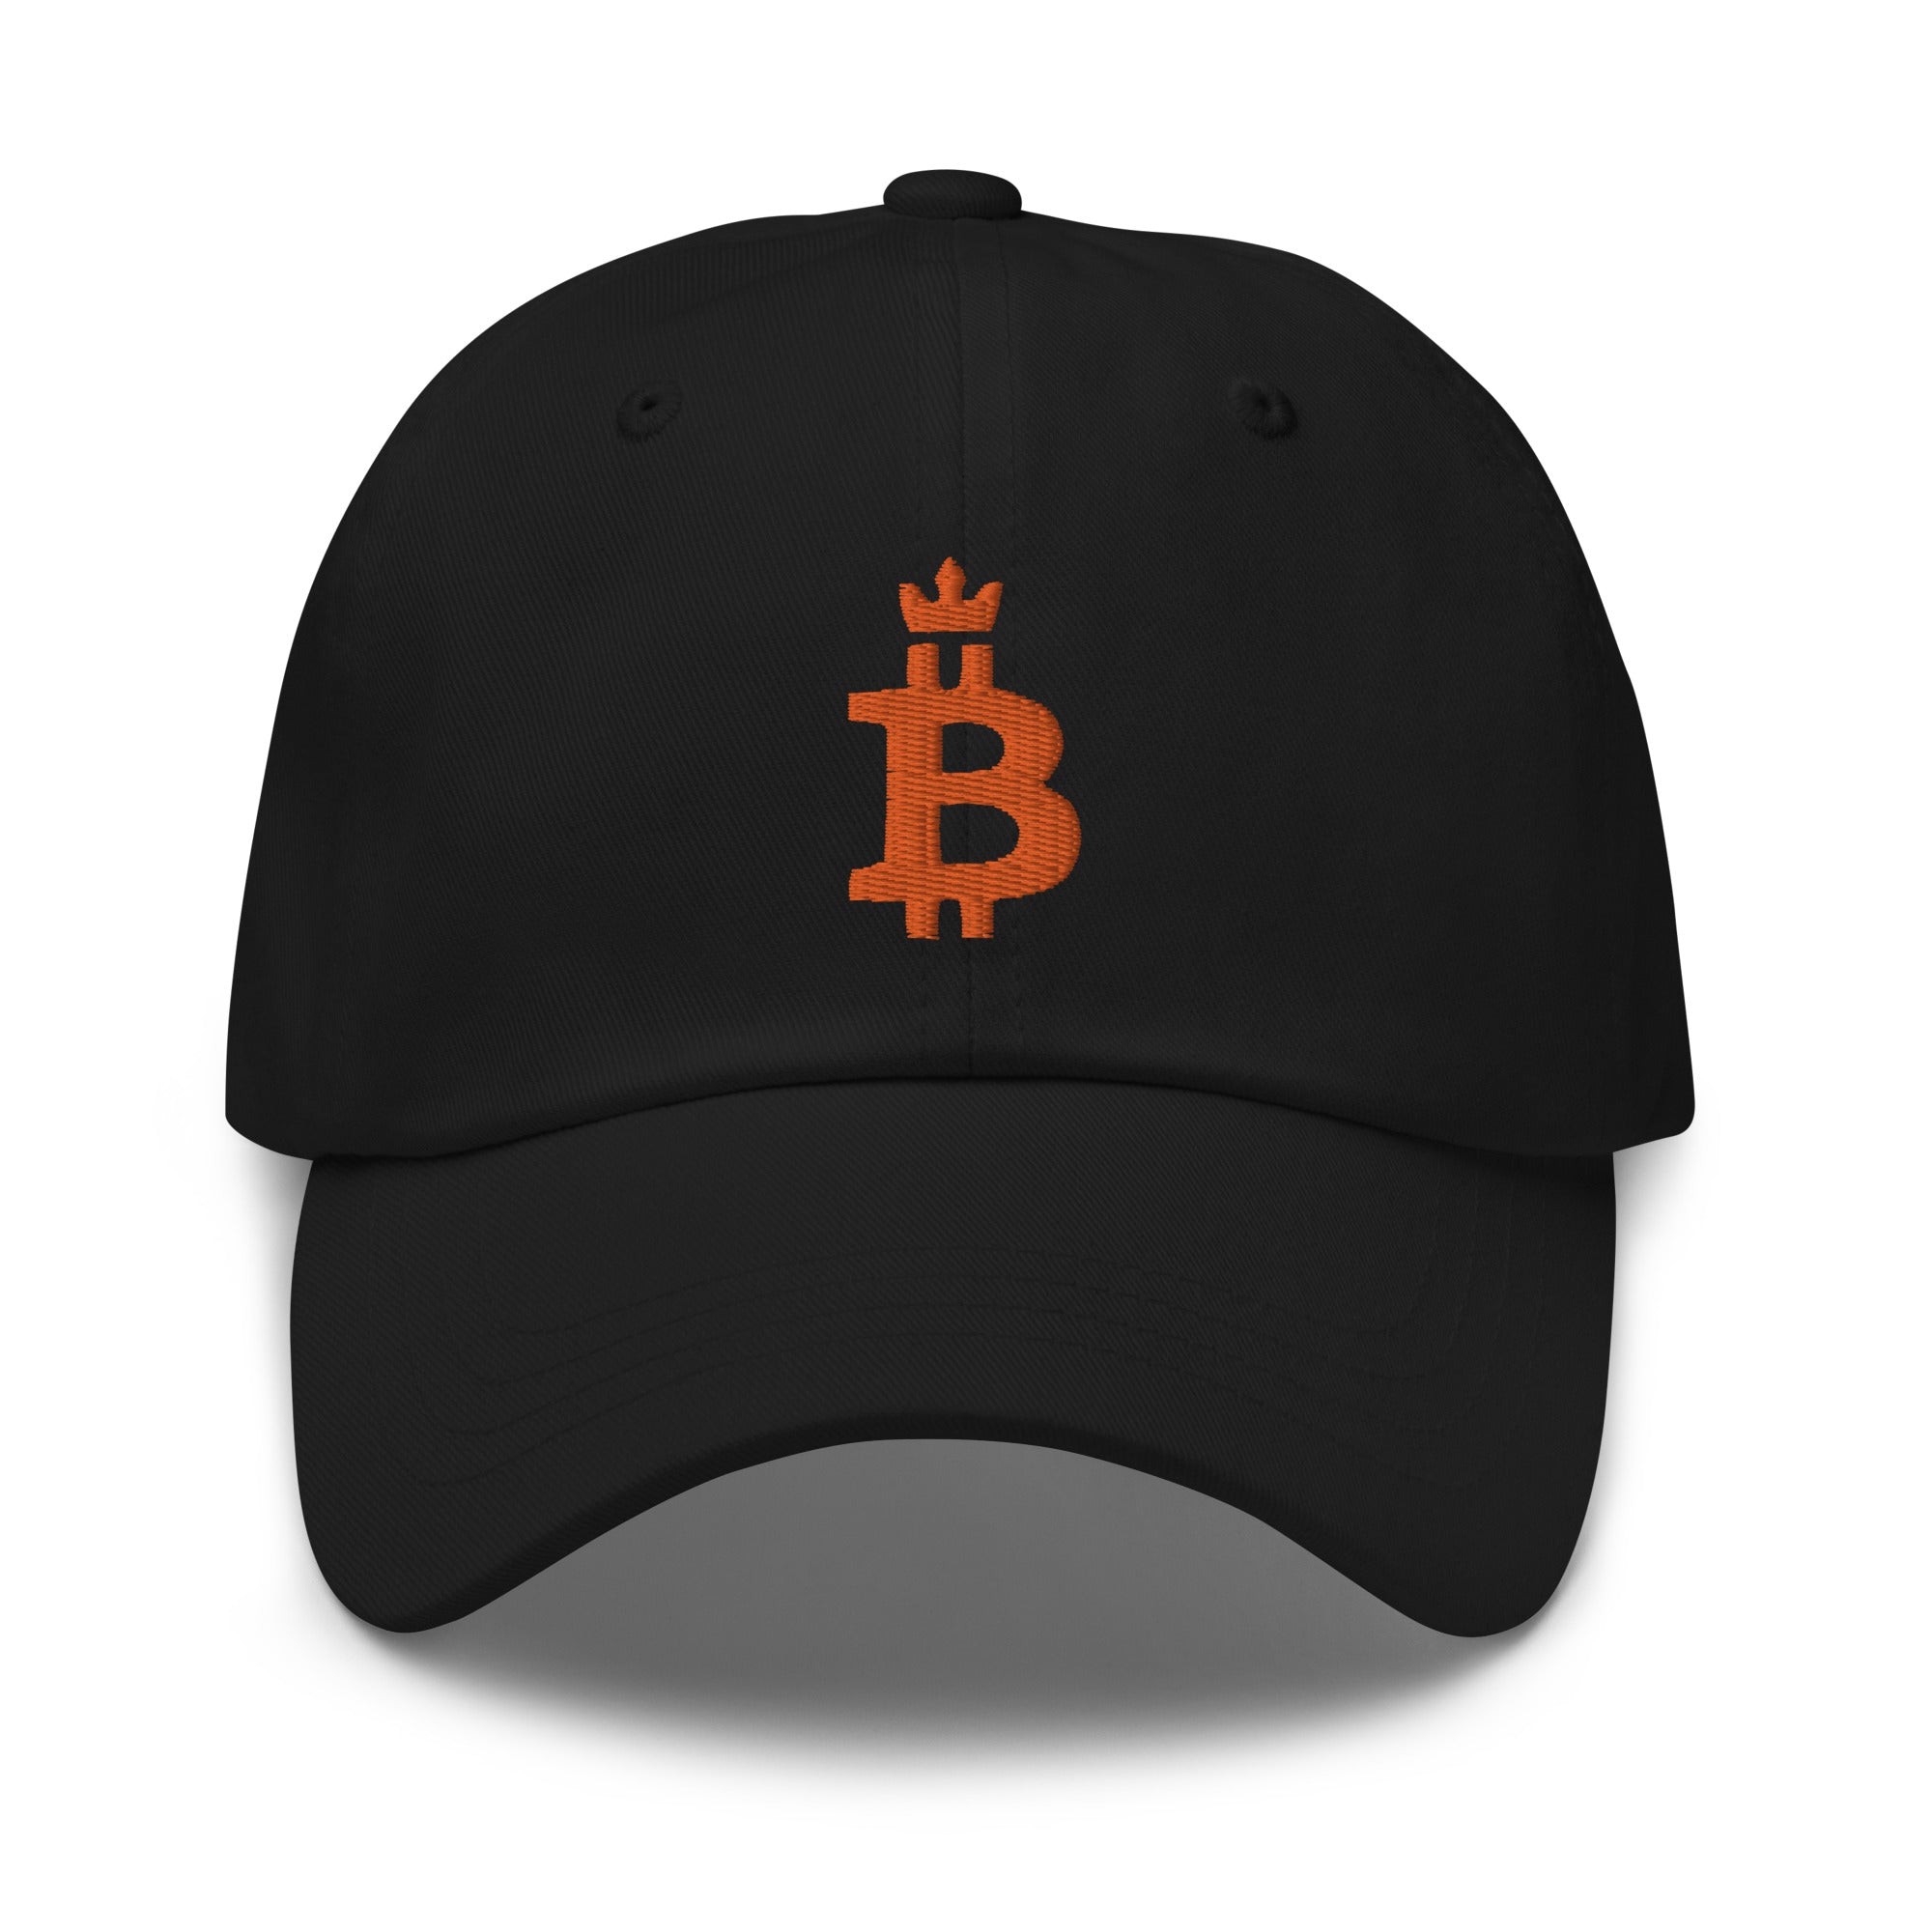 Bitcoin Apparel - Bitcoin Hat - This Bitcoin Dominance Hat features an embroidered design on a black cap. Front view.